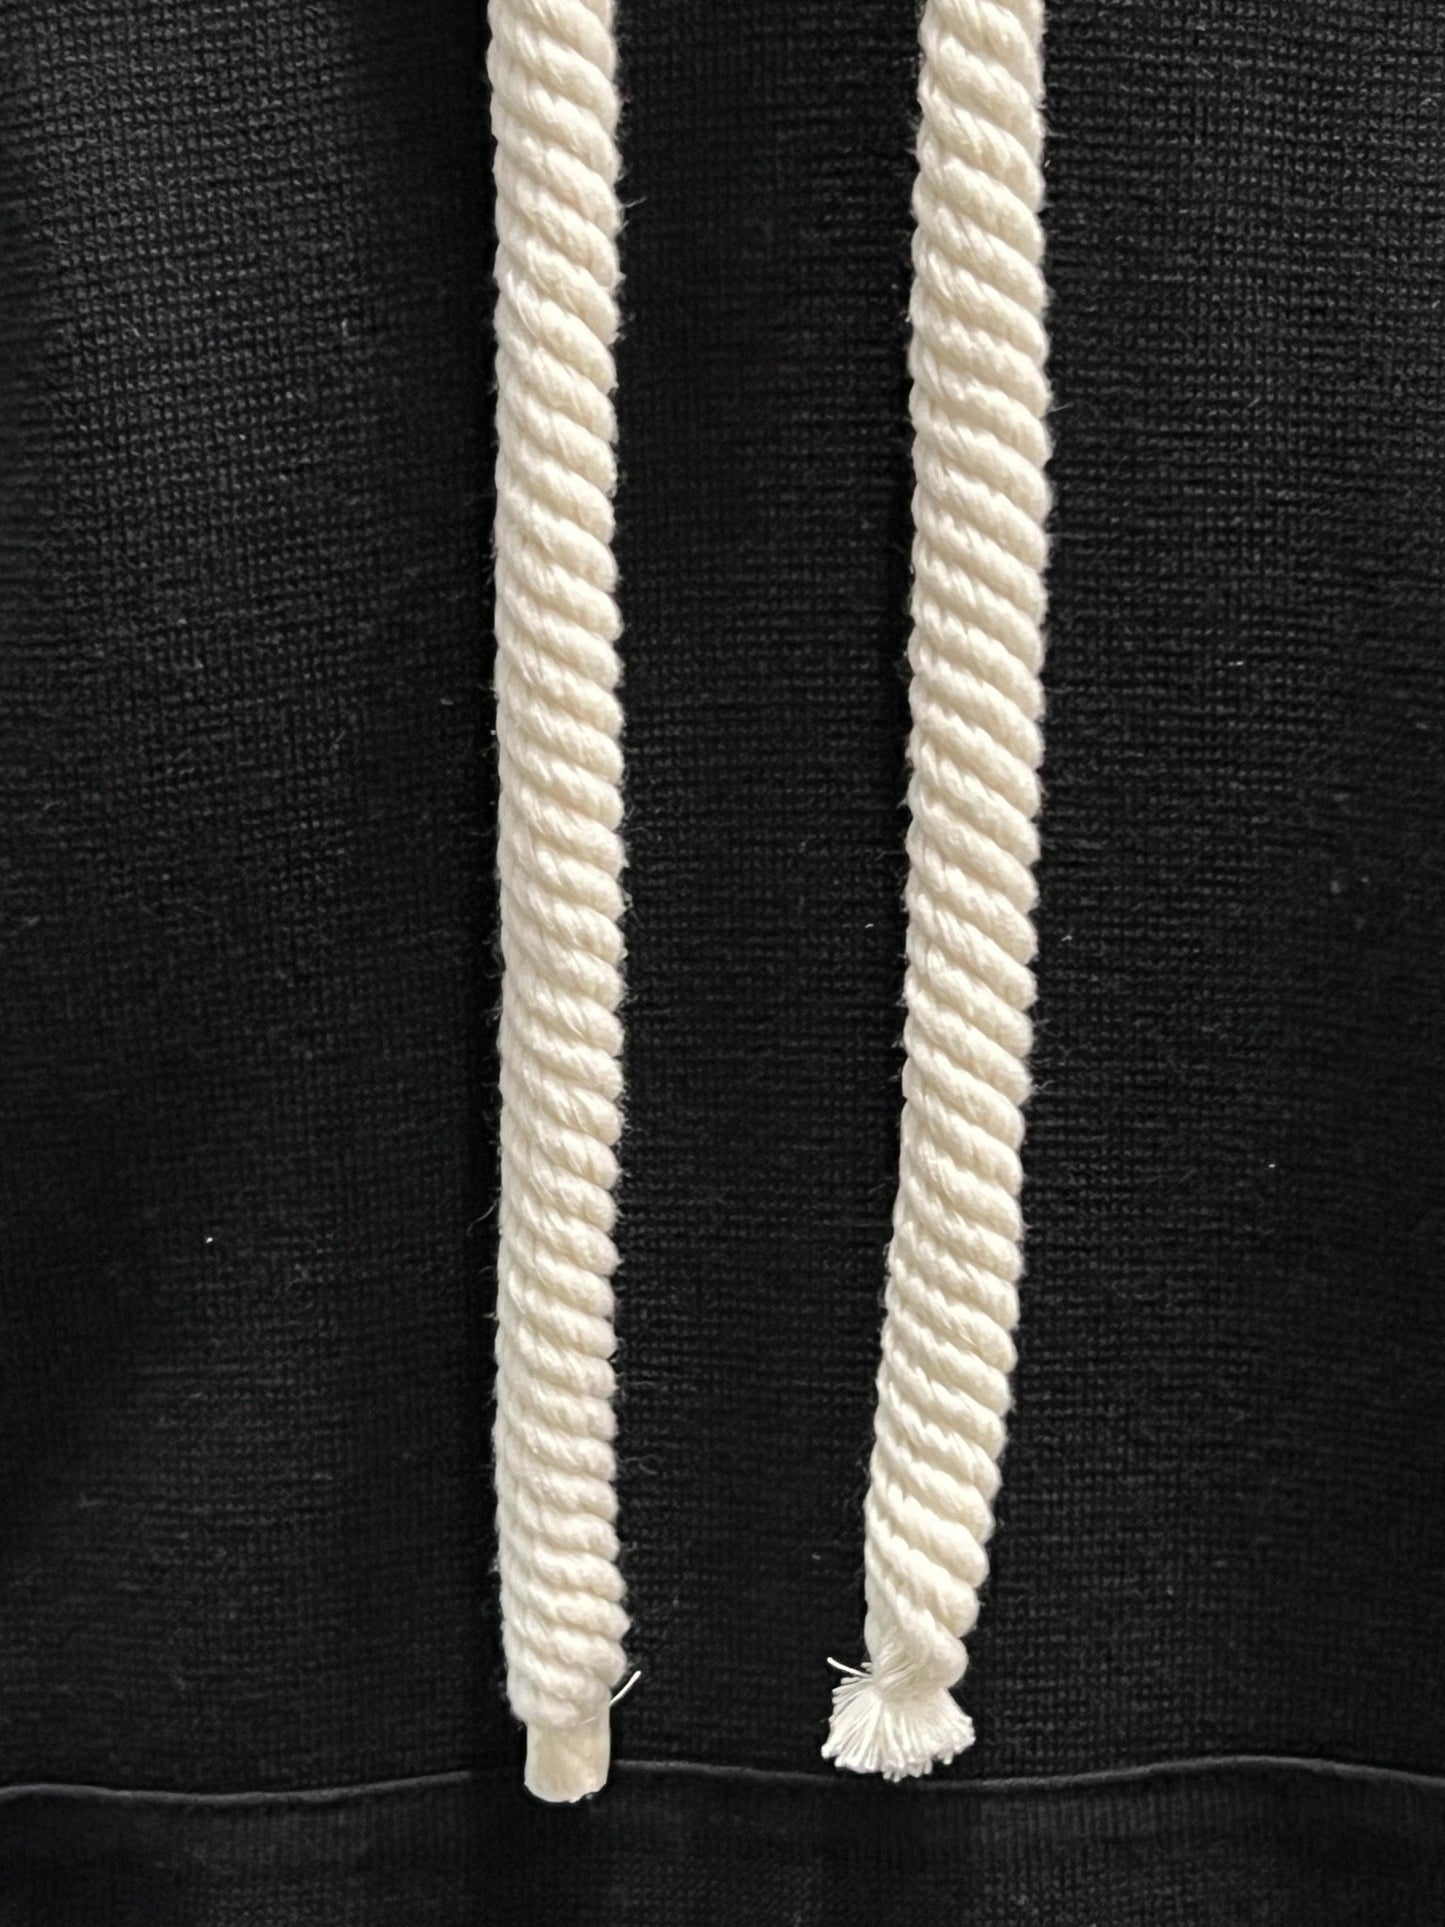 Two white rope tassels hanging vertically against a FAMILY FIRST SWS2401 HOODIE SWEATER BK fabric background with an embroidered heart logo.